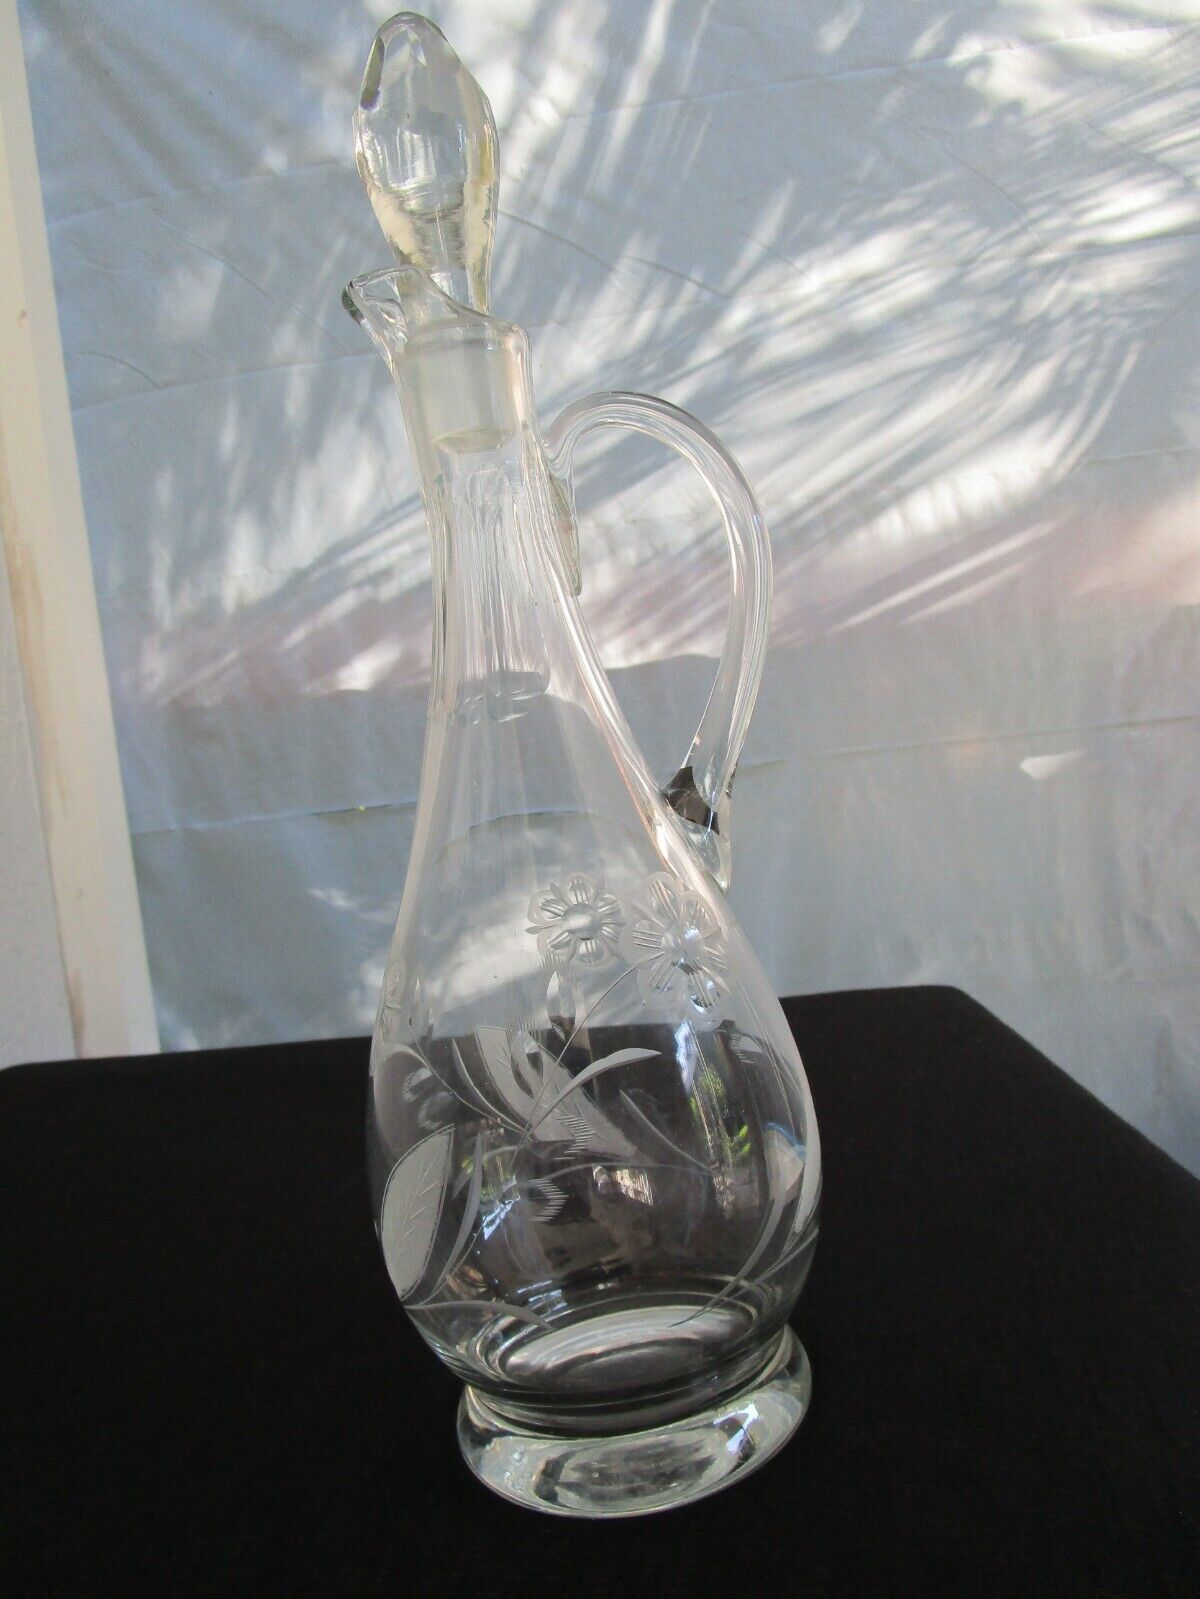 Vintage Etched/Frosted/Cut Glass Tall Handled Decanter with Flower Pattern Cut G